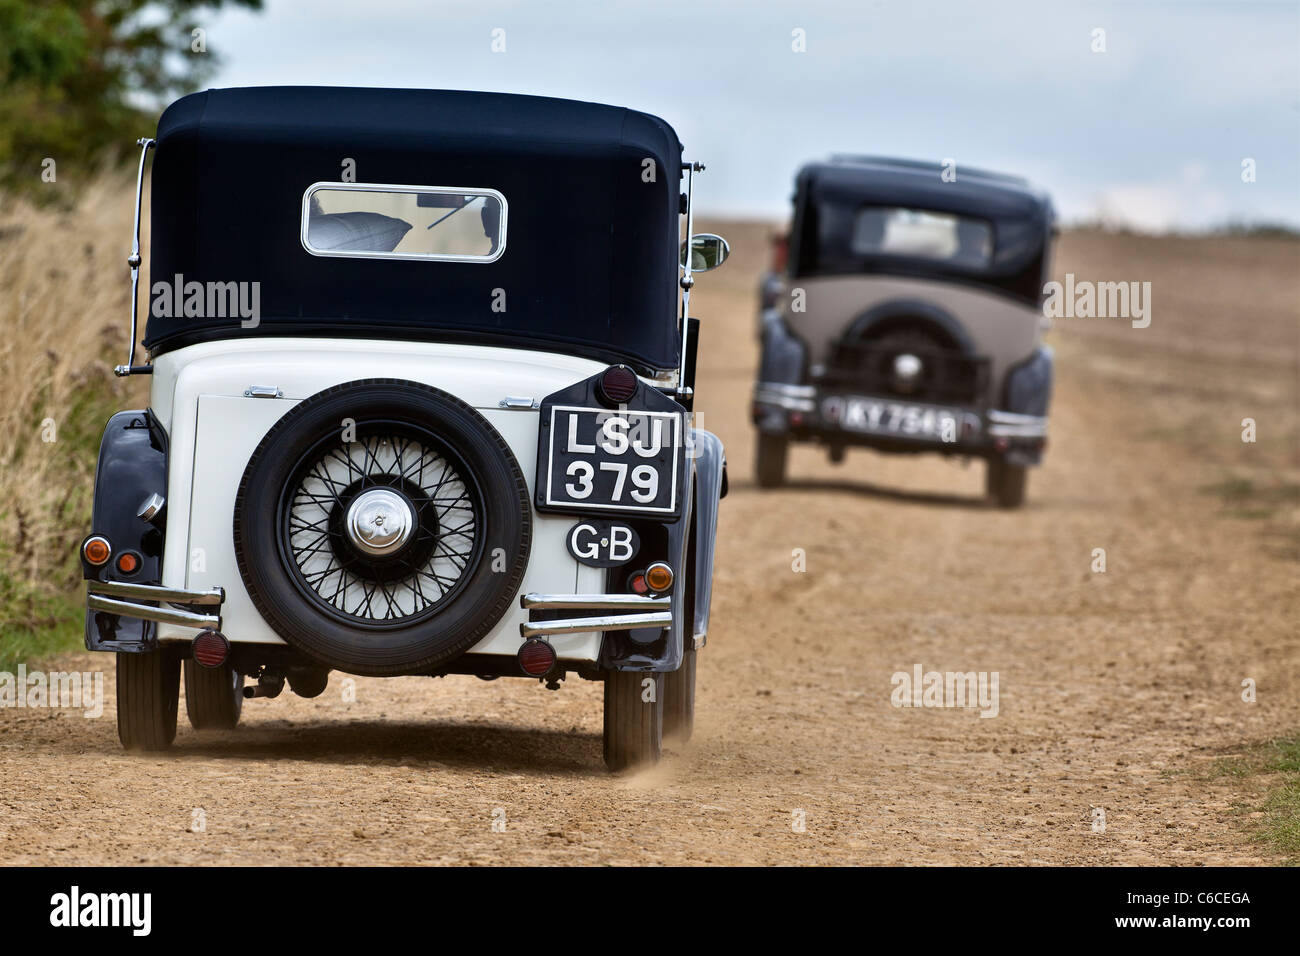 Two vintage Austin 7 cars from the 1930s Stock Photo